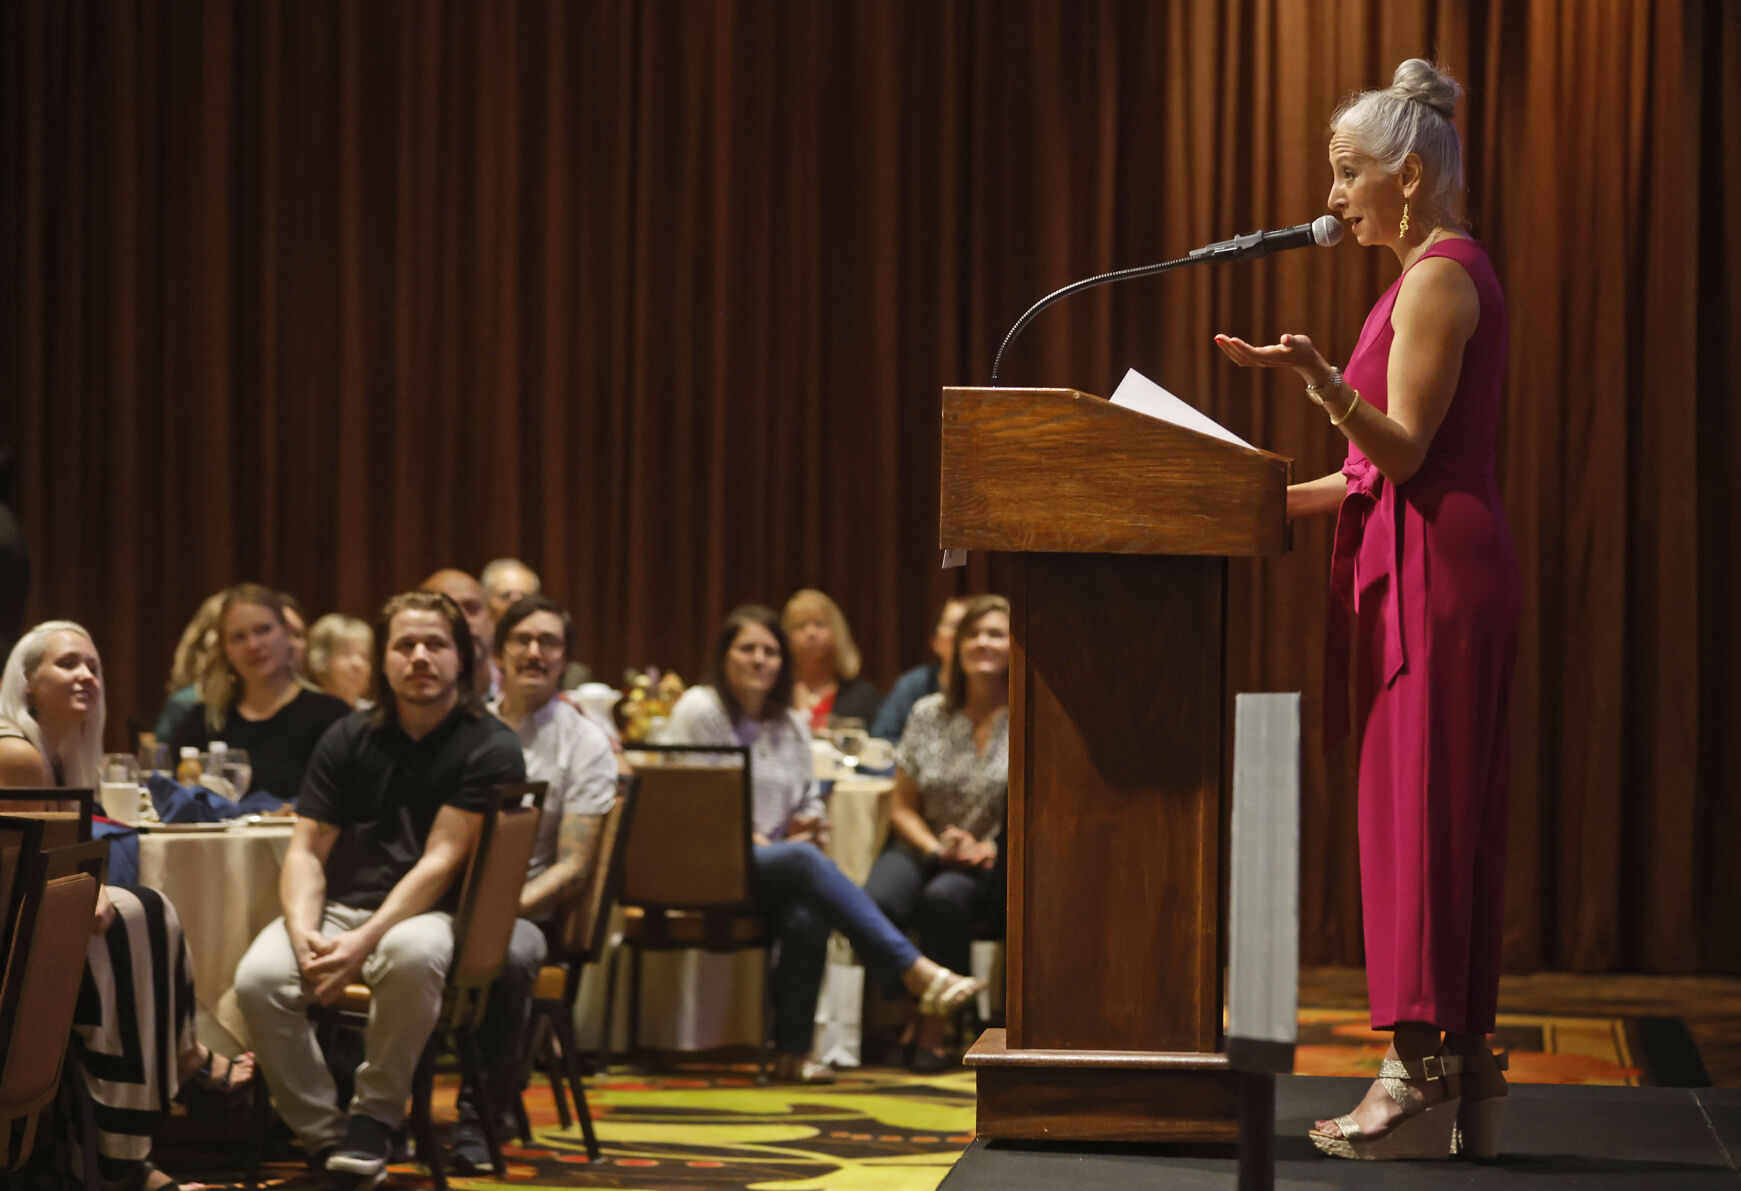 Leslie Shalabi speaks during the Salute to Women Awards at Diamond Jo Casino in Dubuque. Leslie received the award for Woman of the Year.    PHOTO CREDIT: Jessica Reilly